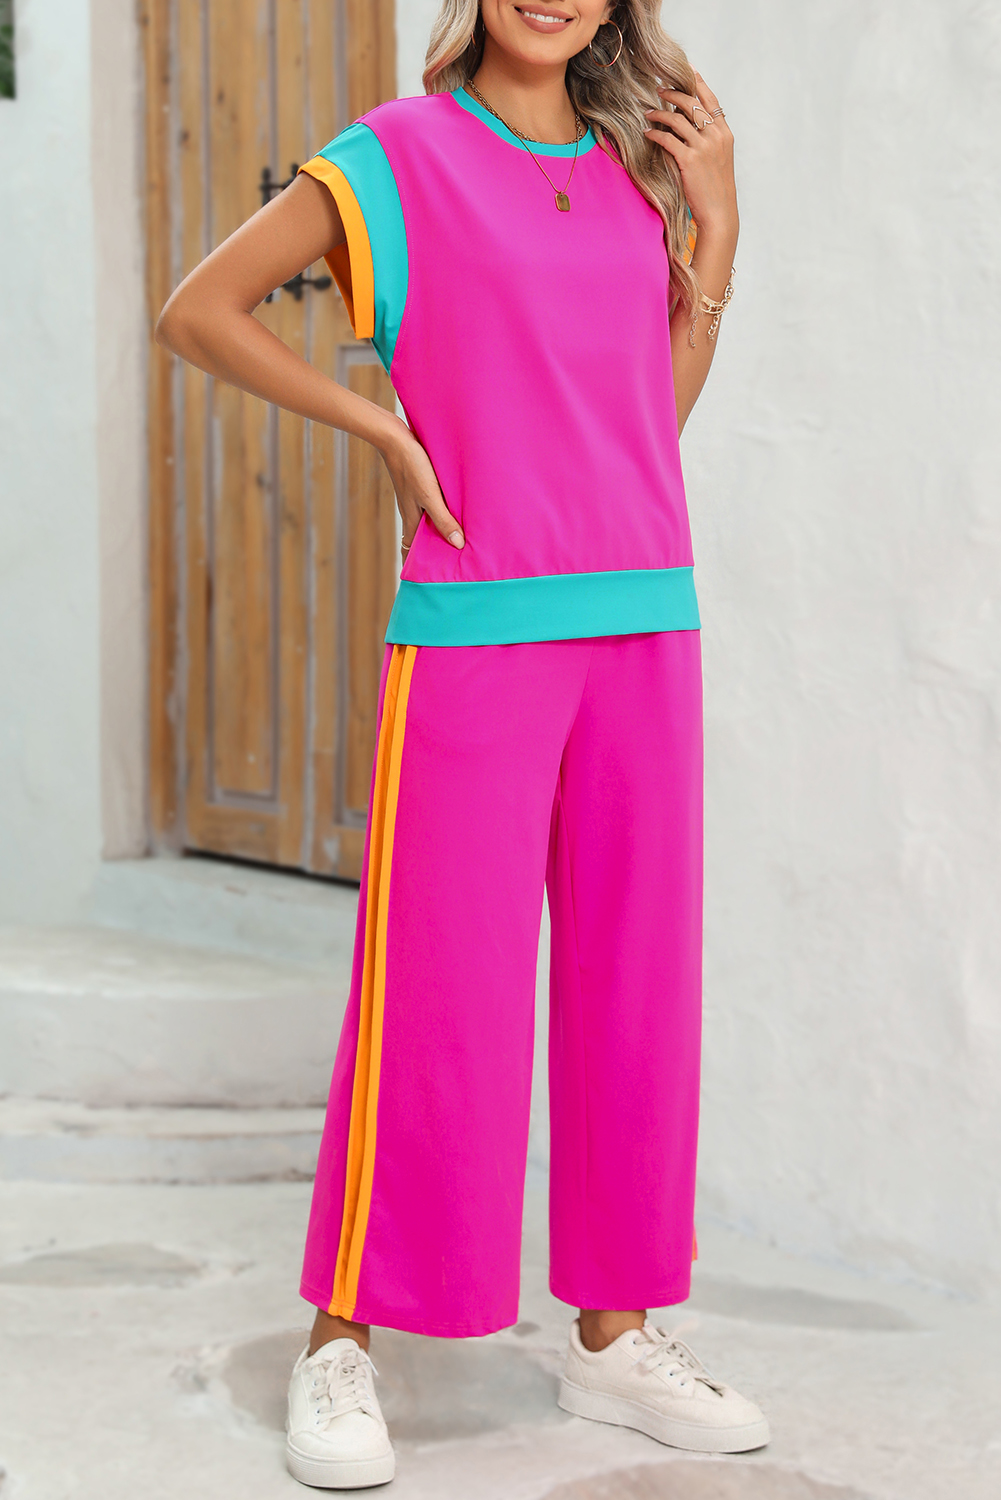 Shewin Wholesale Customized Strawberry Pink Colorblock Cap Sleeve Tee and Wide Leg PANTS Set